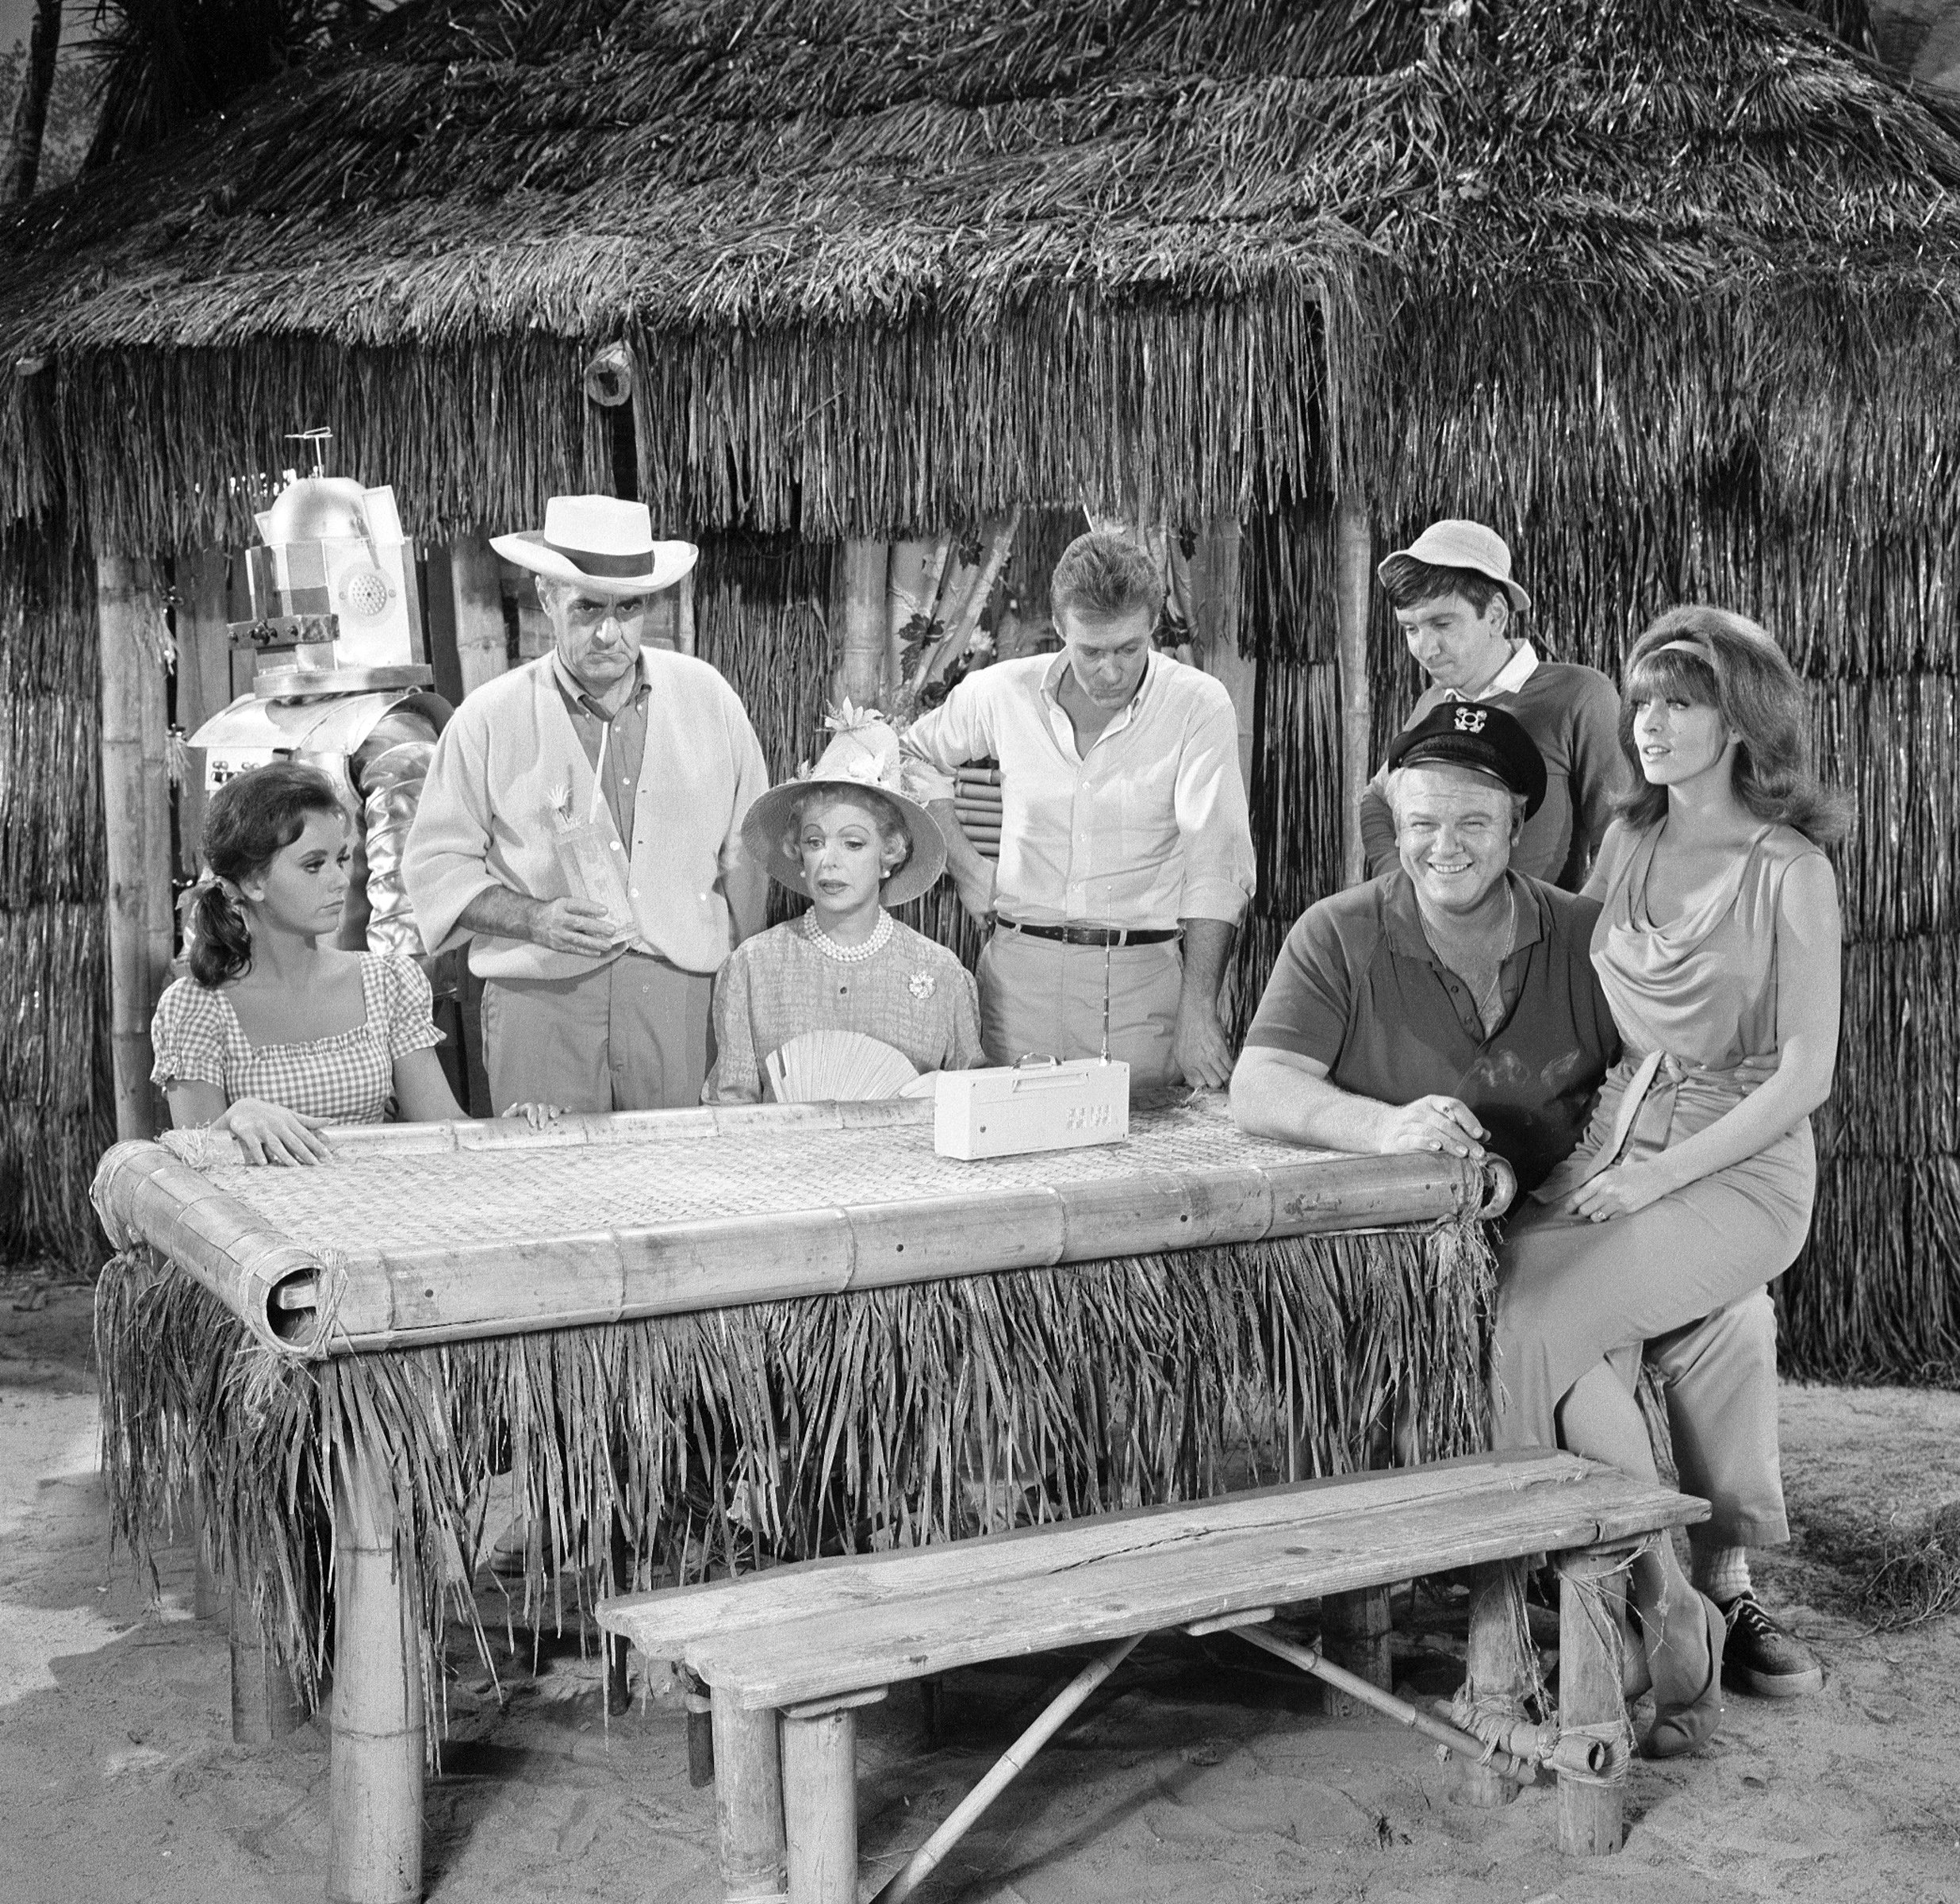 'The Gilligan's Island' cast sitting around a picnic table near a bamboo hut.